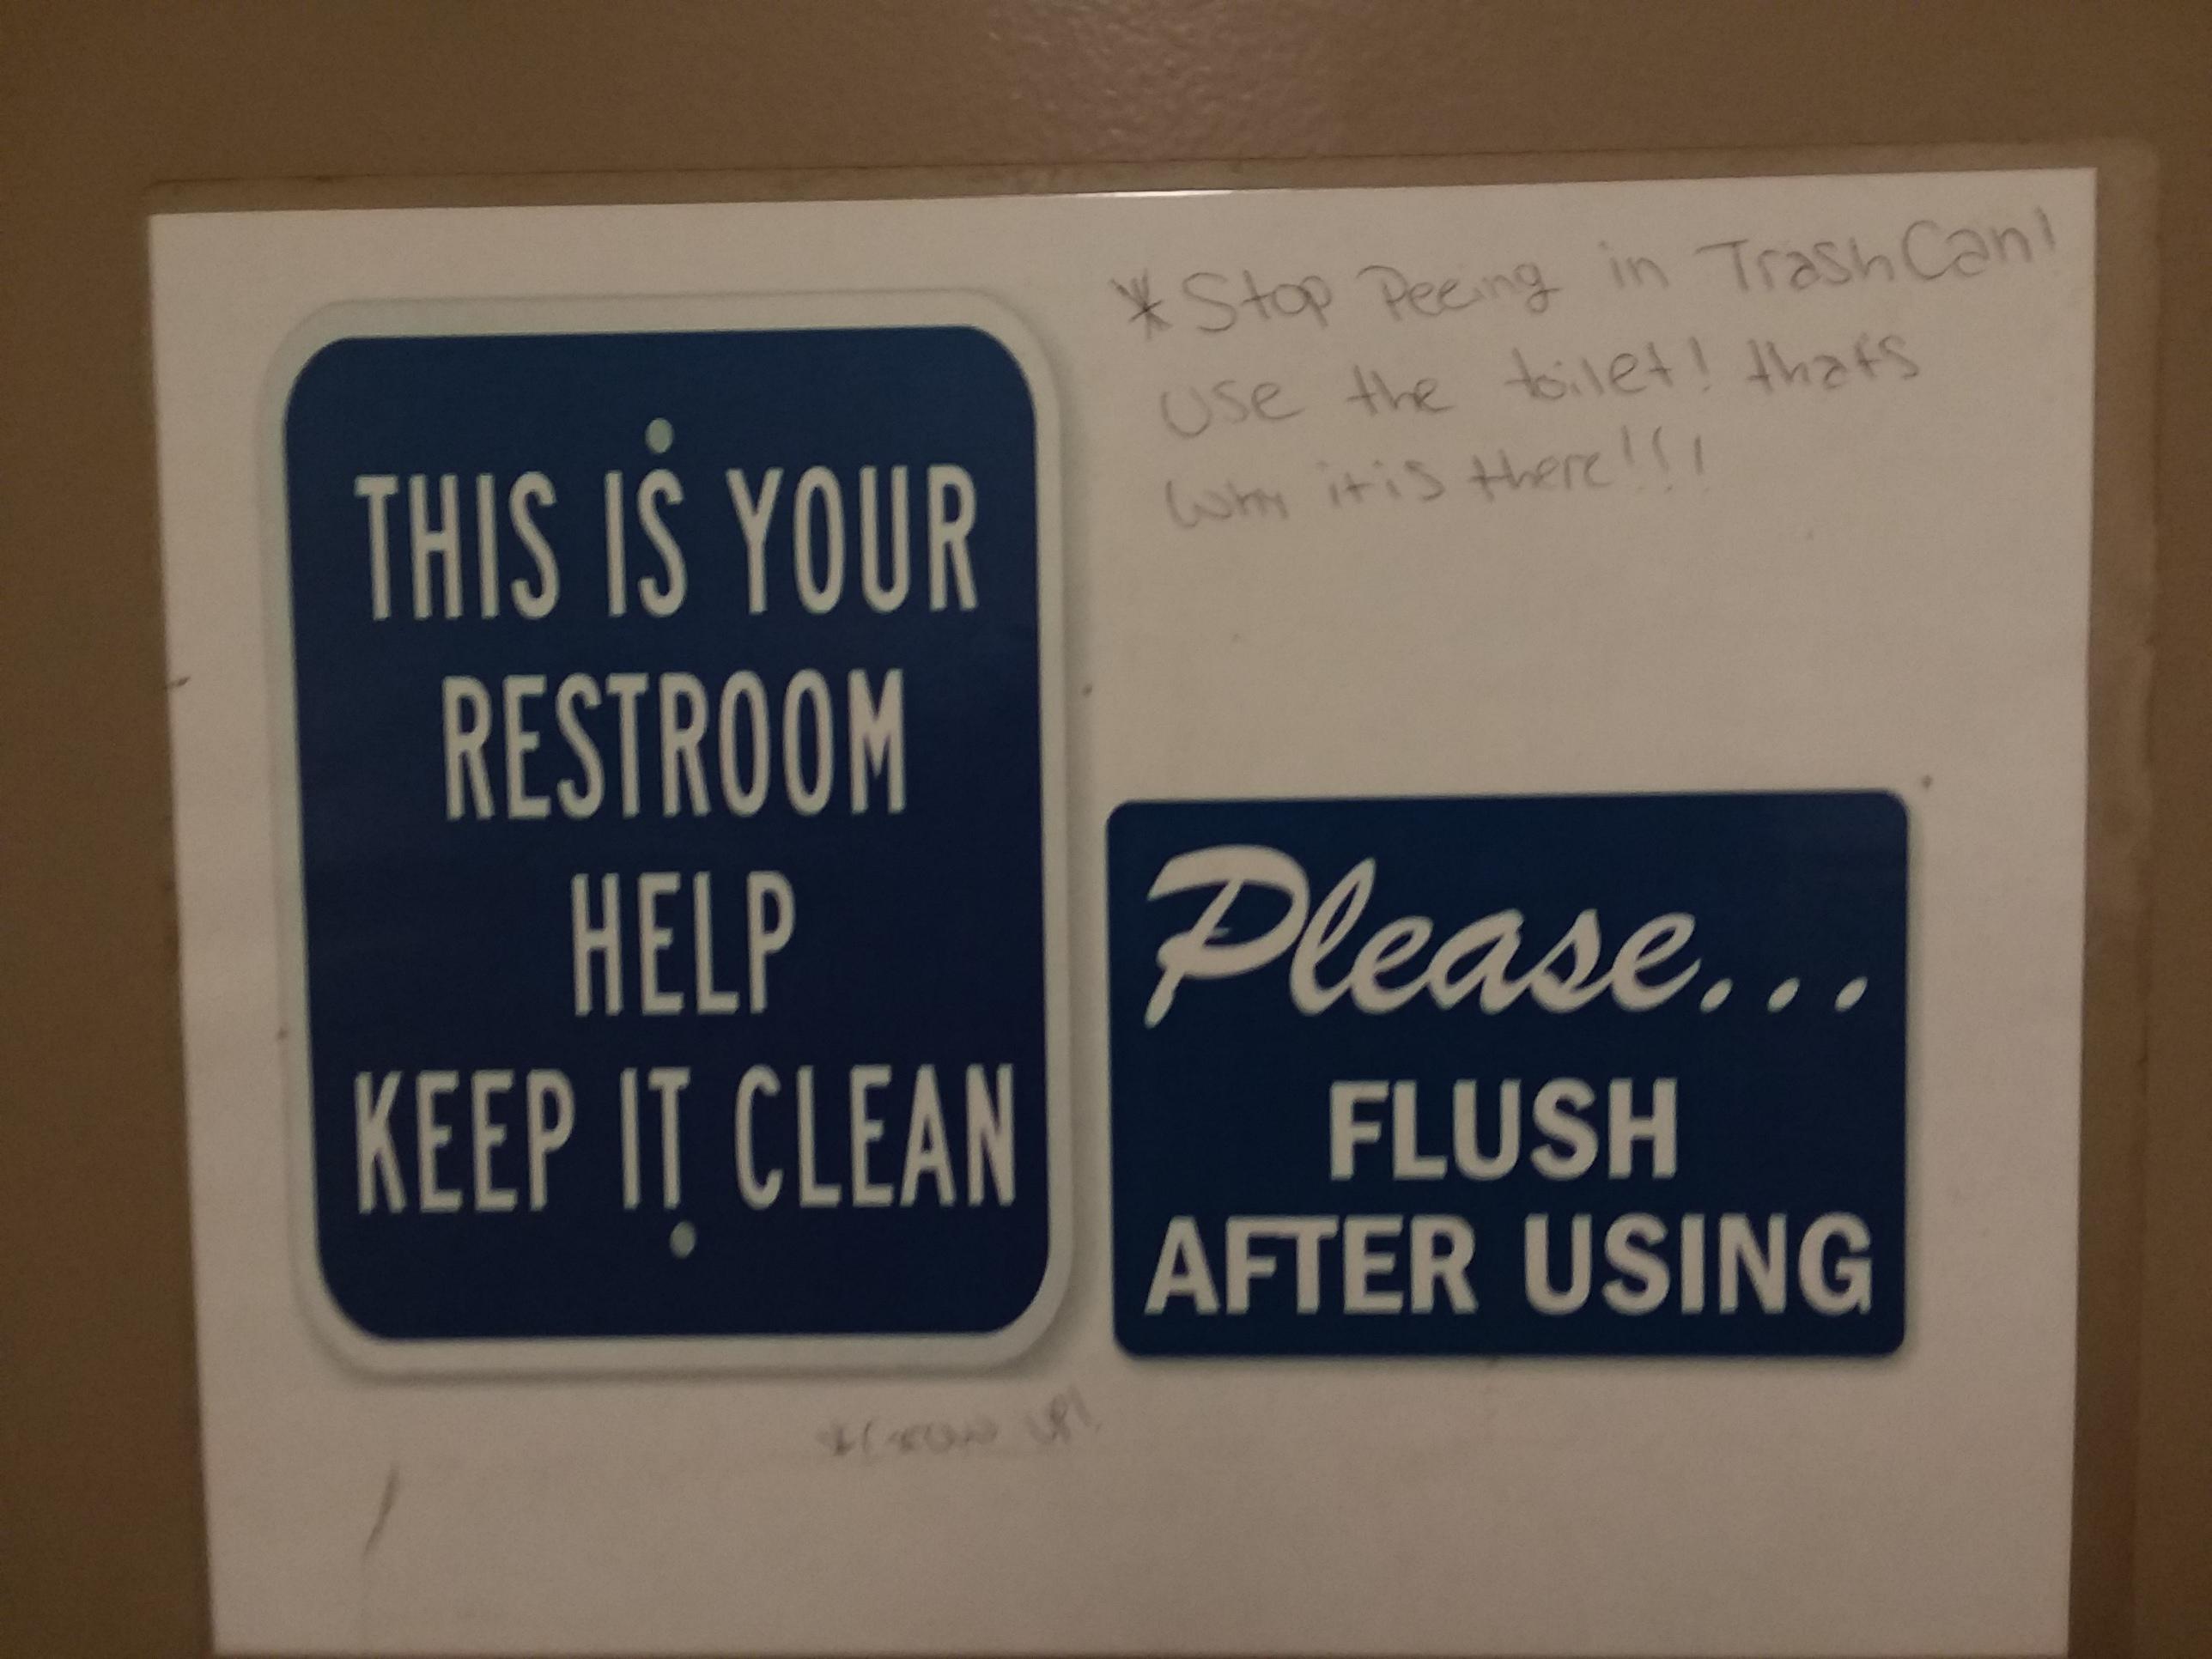 sign - Stop Peeing in Trash Can! use the toilet! thats Why it is there!!! This Is Your Restroom Help Keep It Clean Please... Flush | After Using